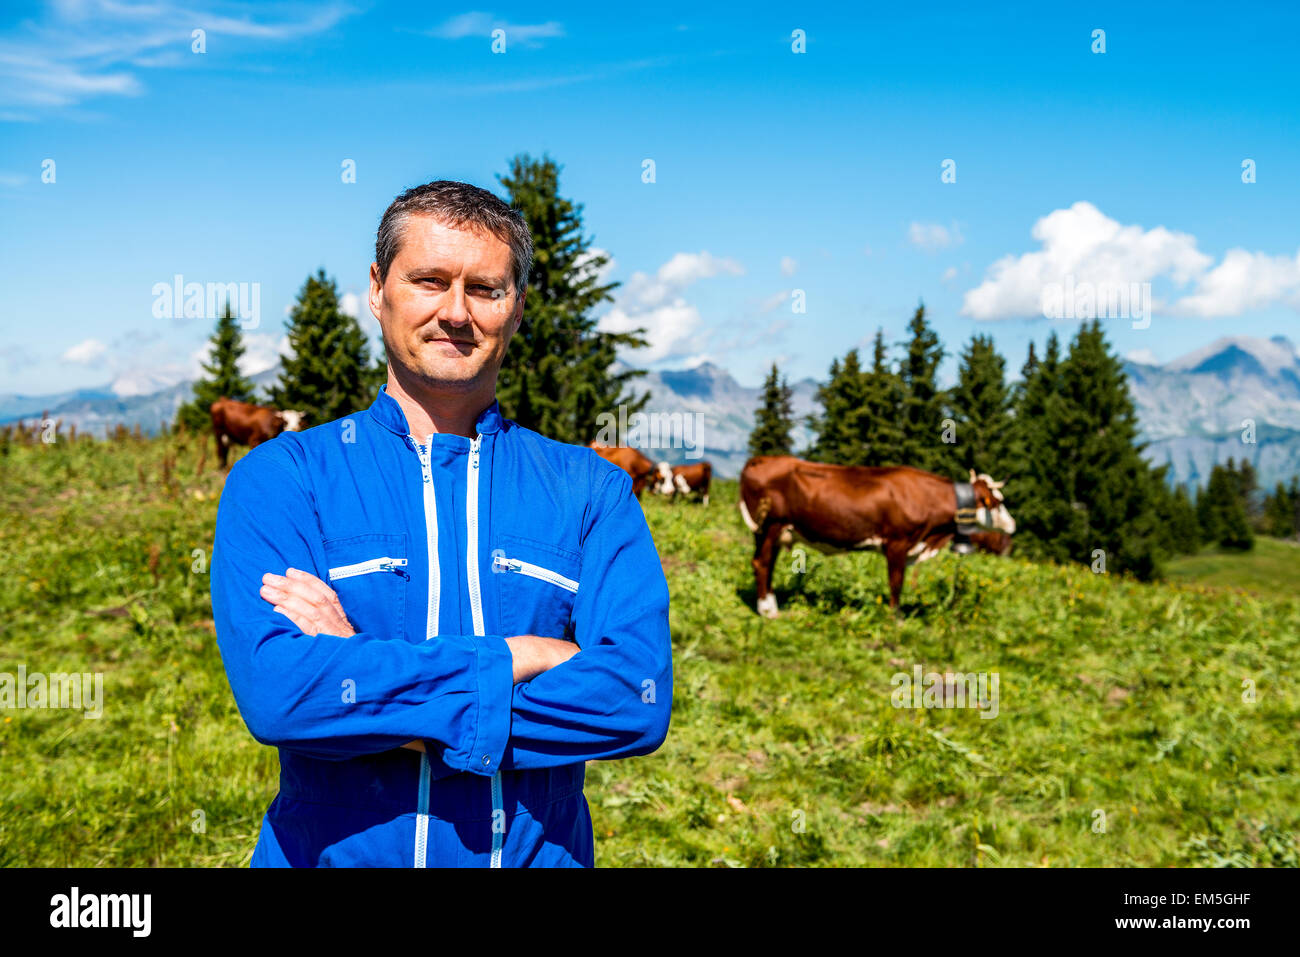 Herdsman and cows Stock Photo